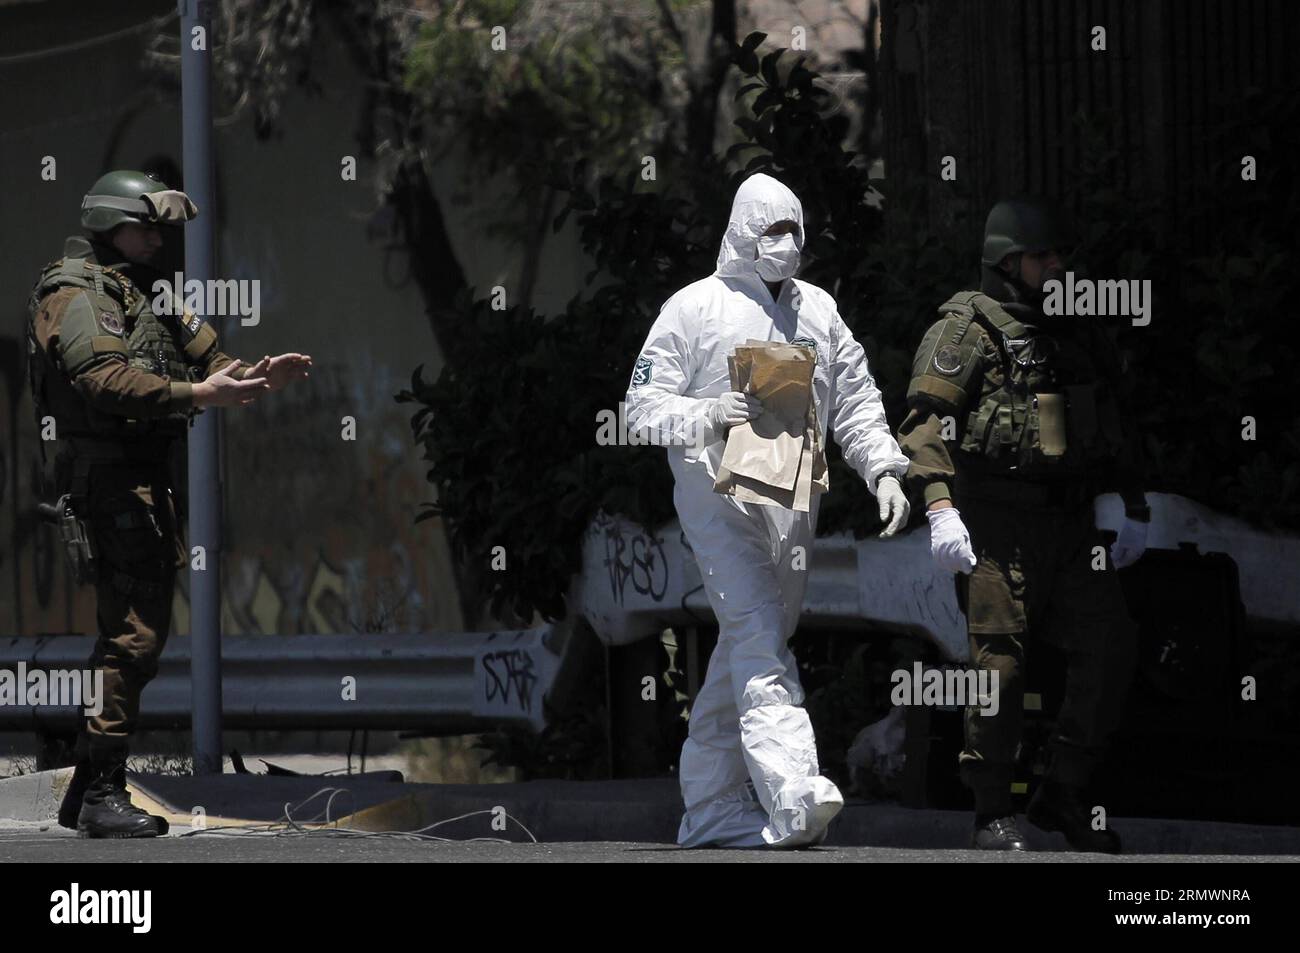 141106) -- SANTIAGO, Nov. 6, 2014 -- Members of the Police Special  Operations Group (GOPE, for its acronym in Spanish) work in the area where  an explosive device was located between San